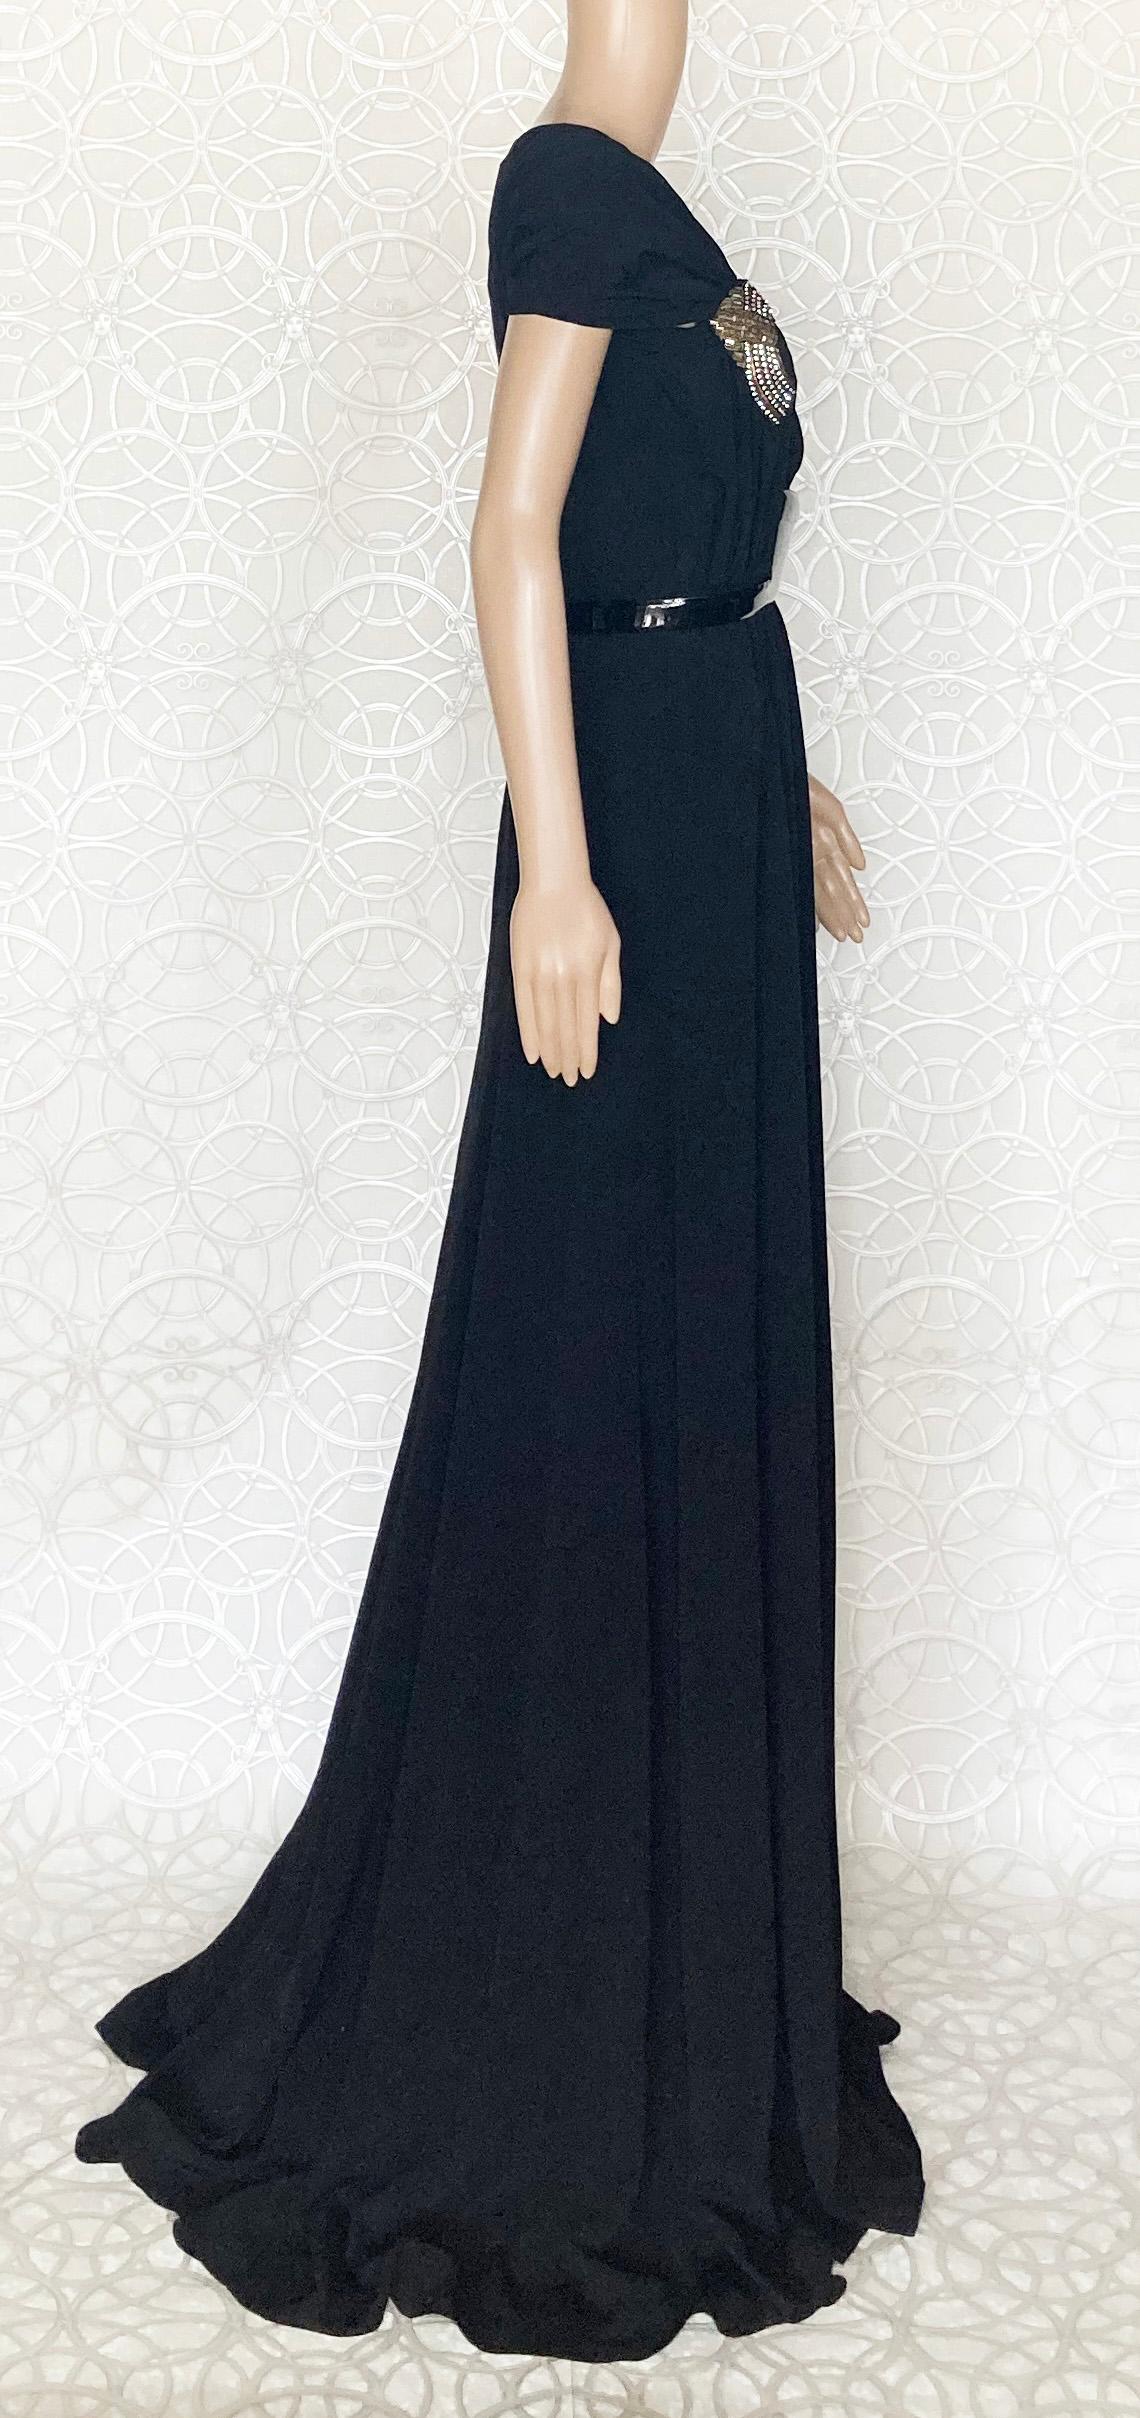 Black New GUCCI BLACK LONG BELTED DRESS GOWN WITH CRYSTAL EMBROIDERY 42 - 8